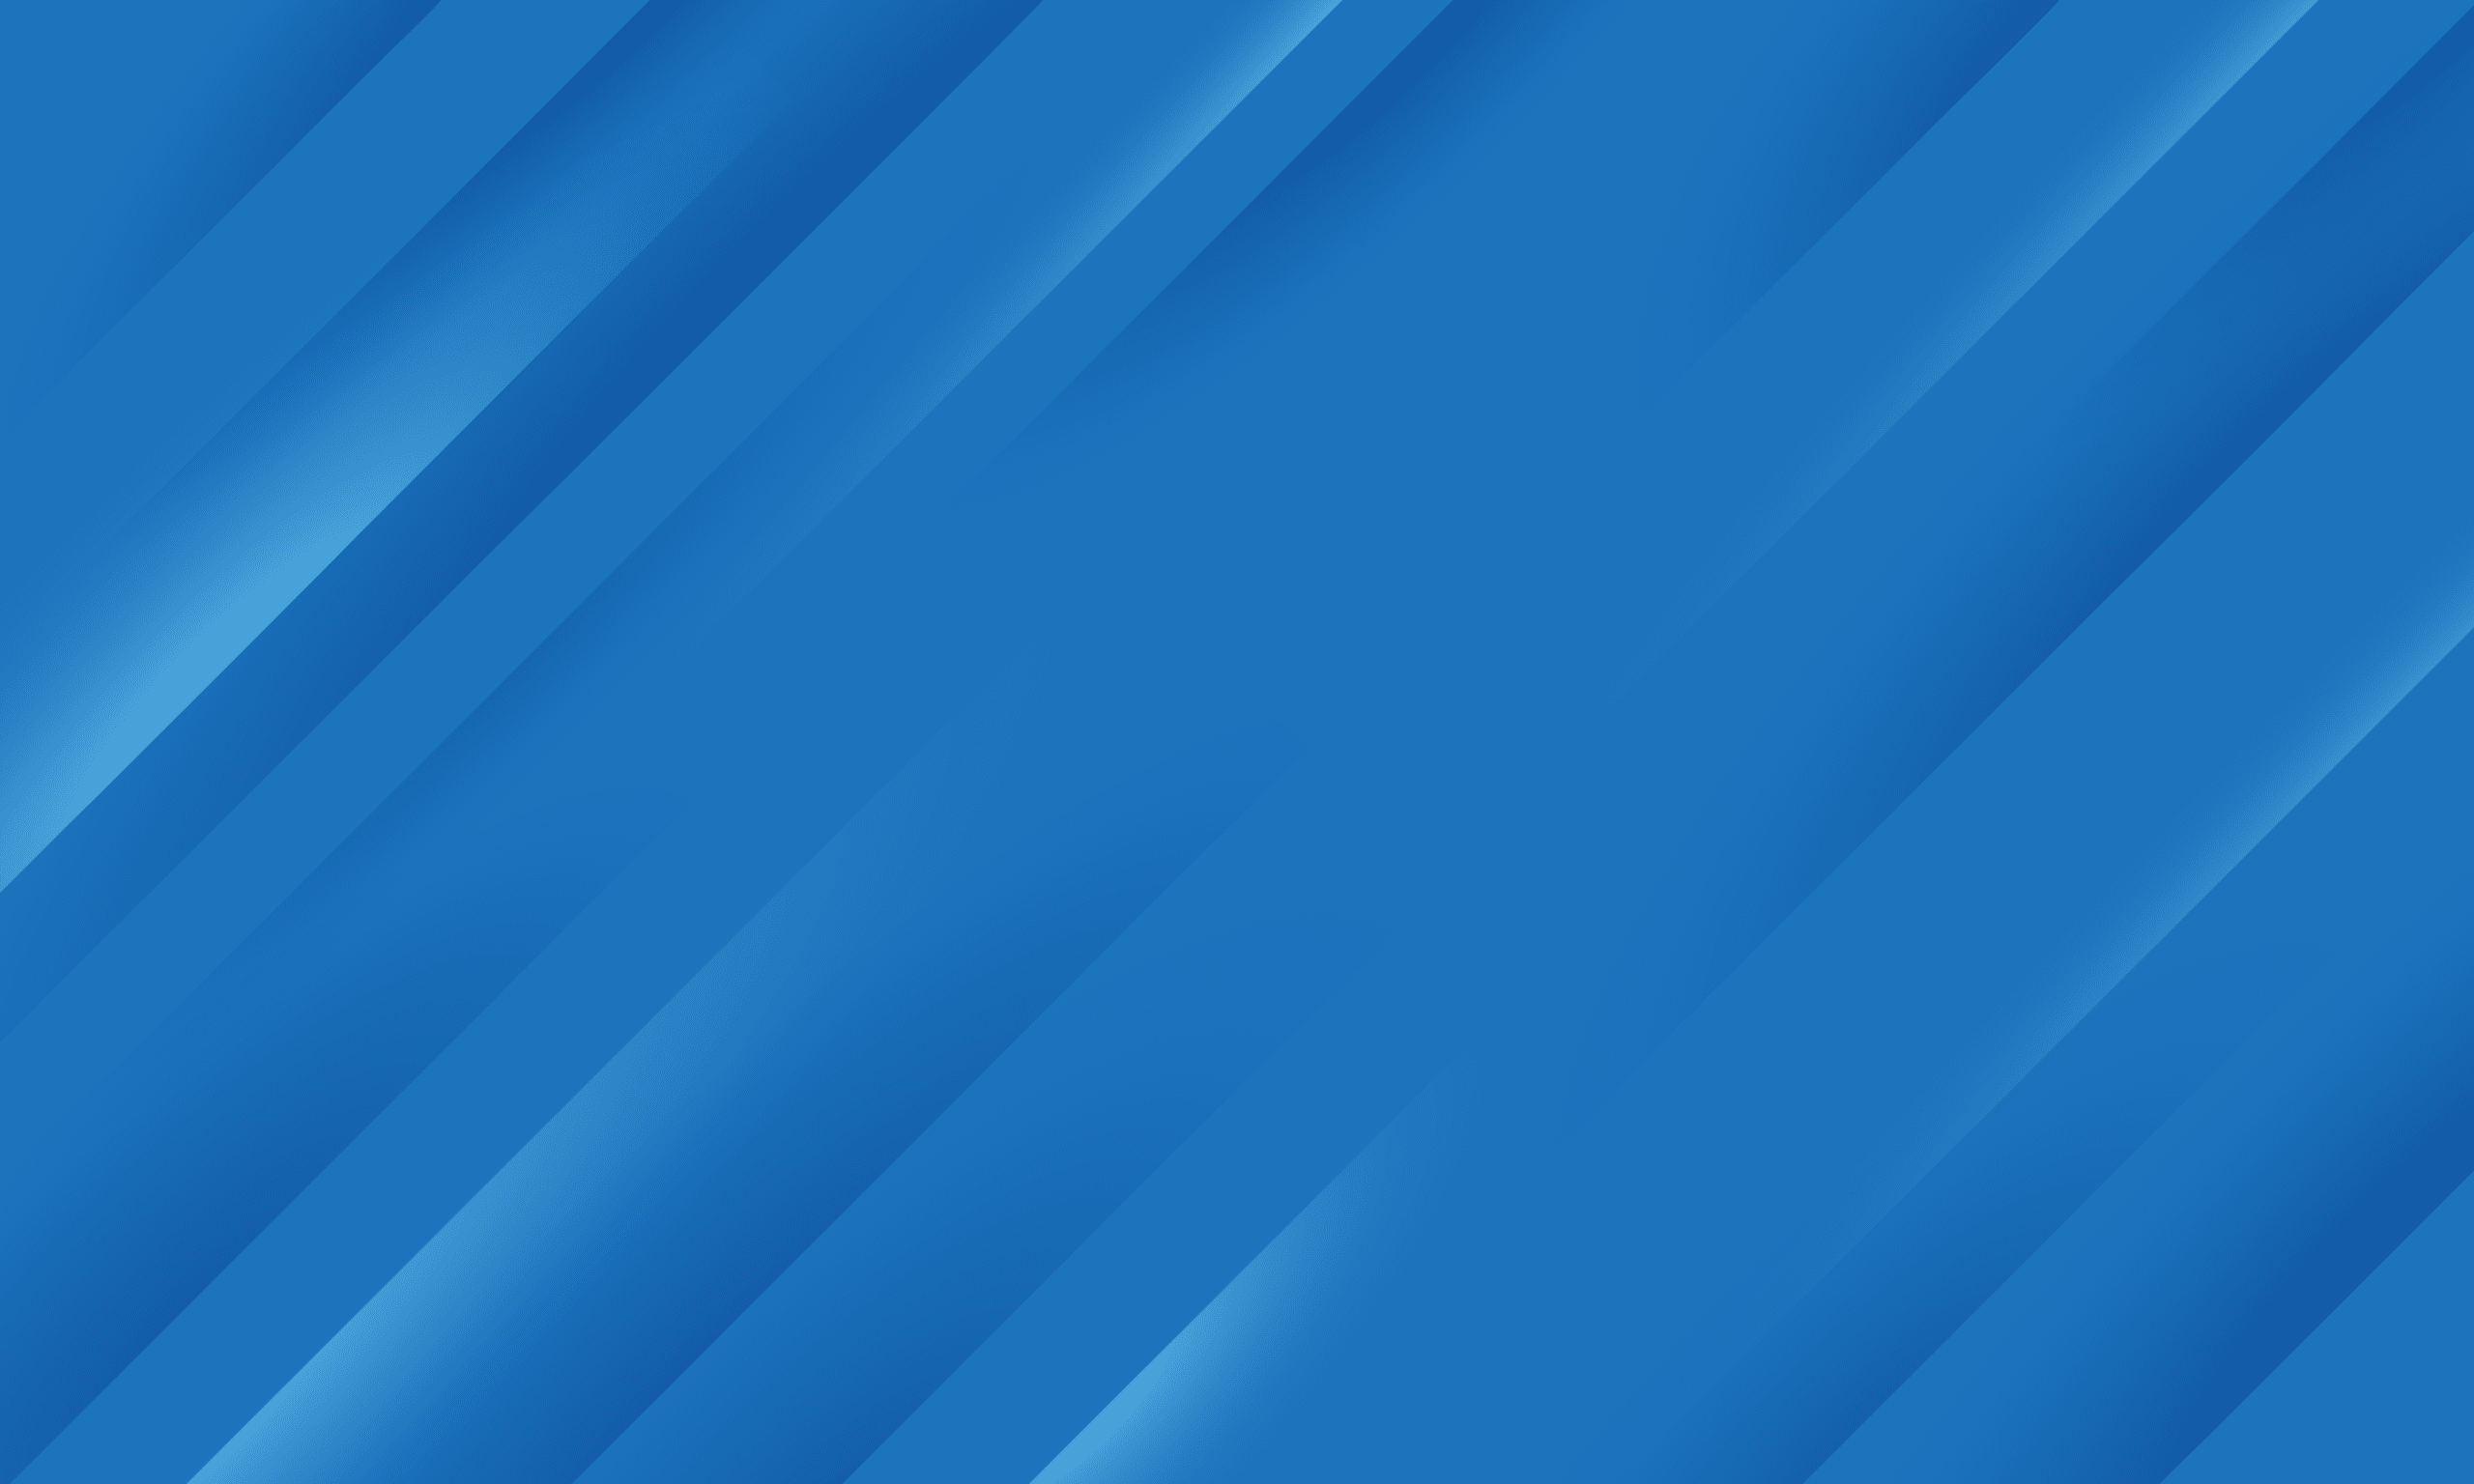 An abstract blue background with diagonal stripes for IT Managed Services.